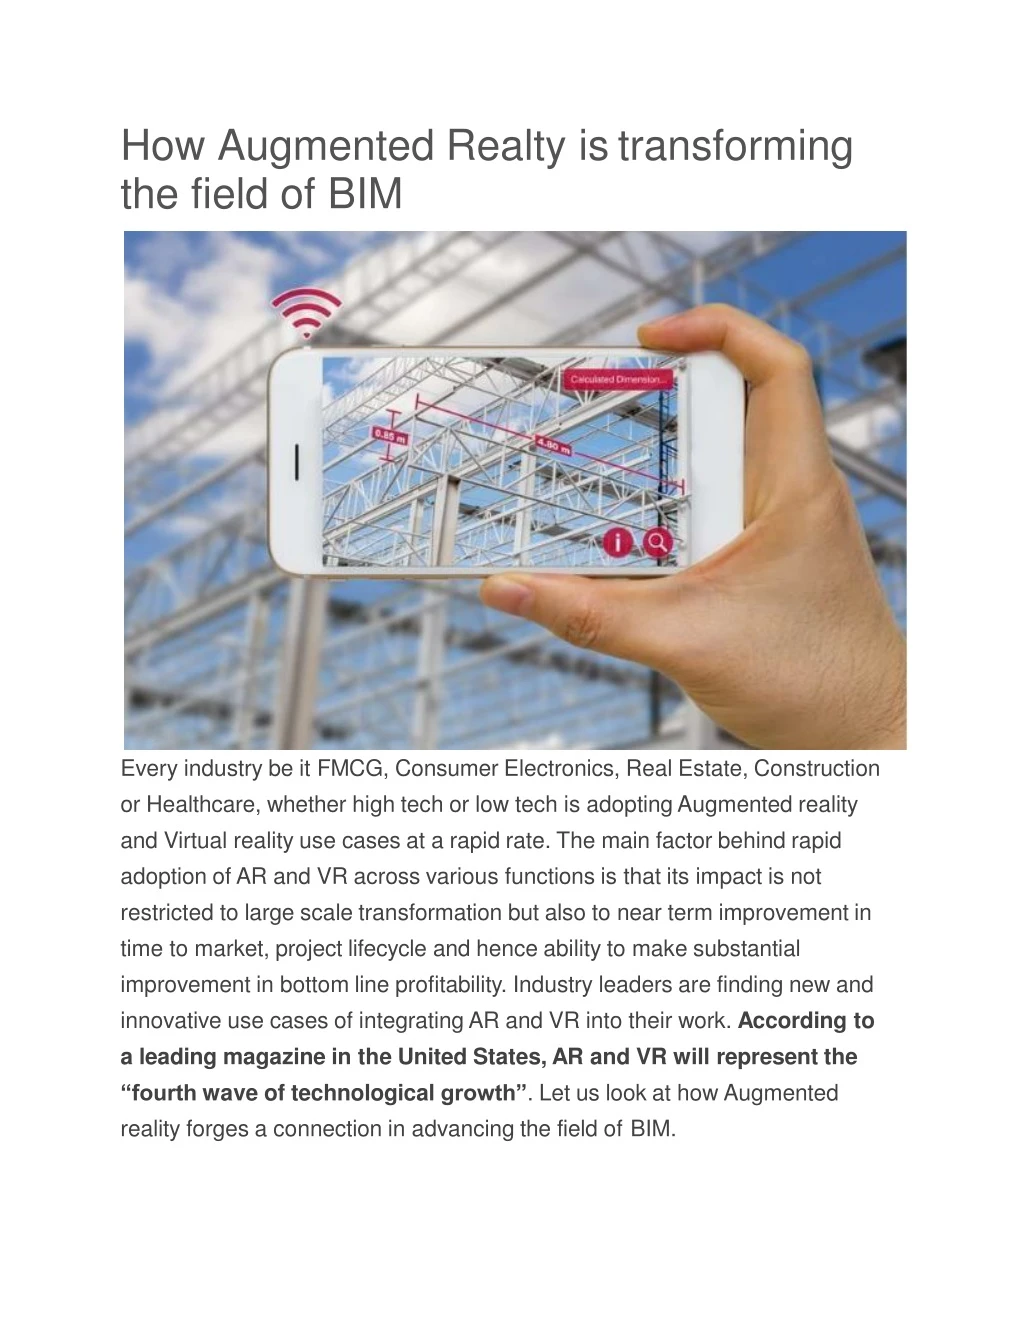 how augmented realty is transforming the field of bim